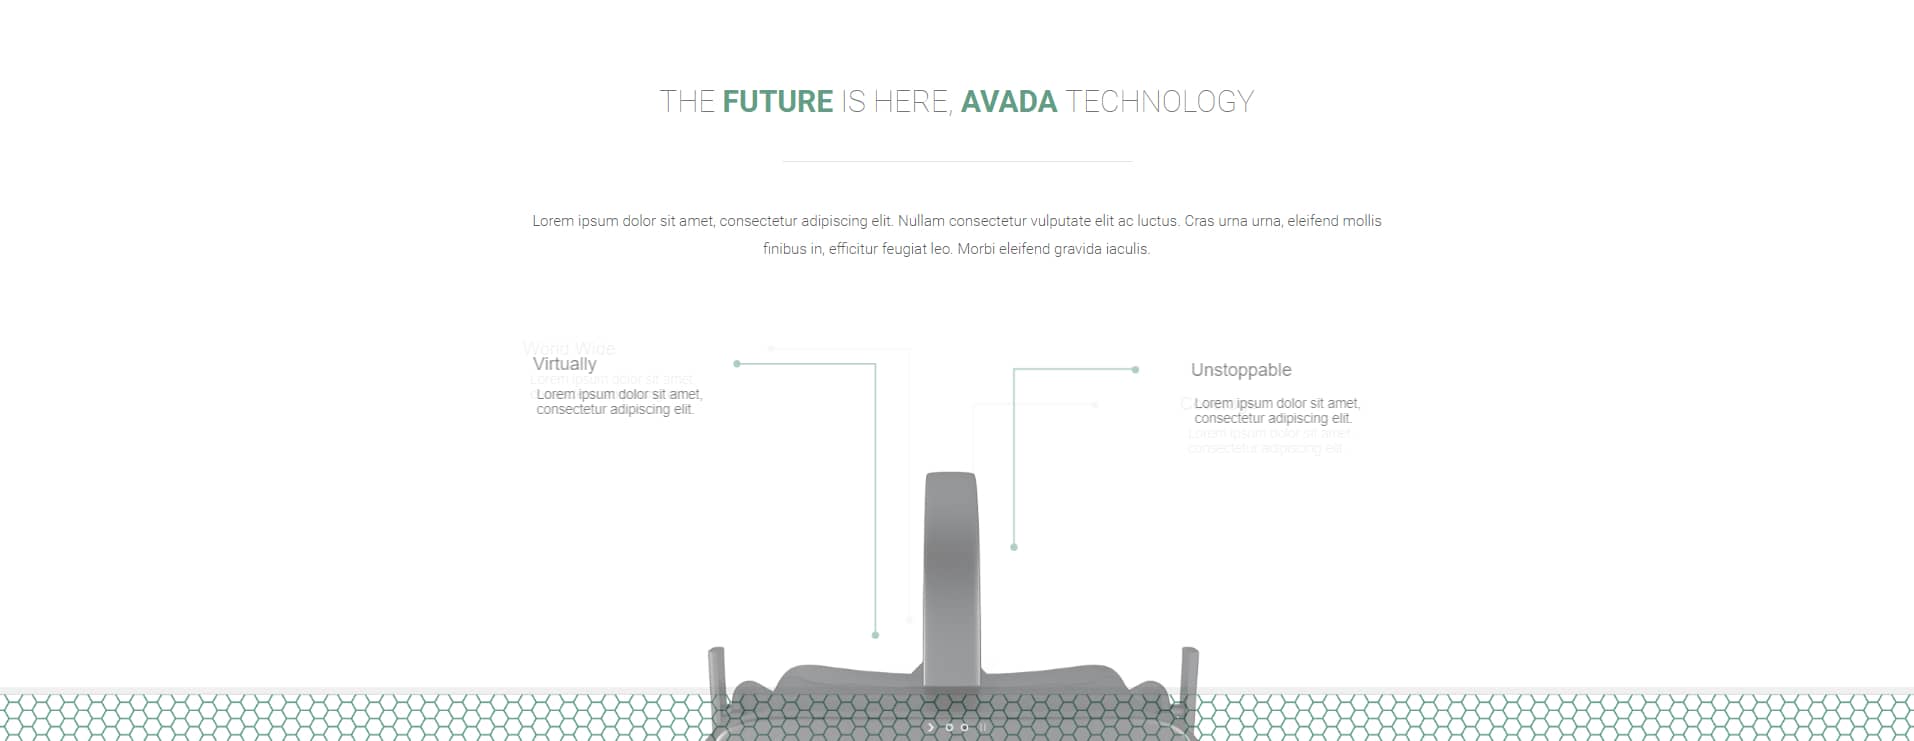 Avada Technology The Future Is Here